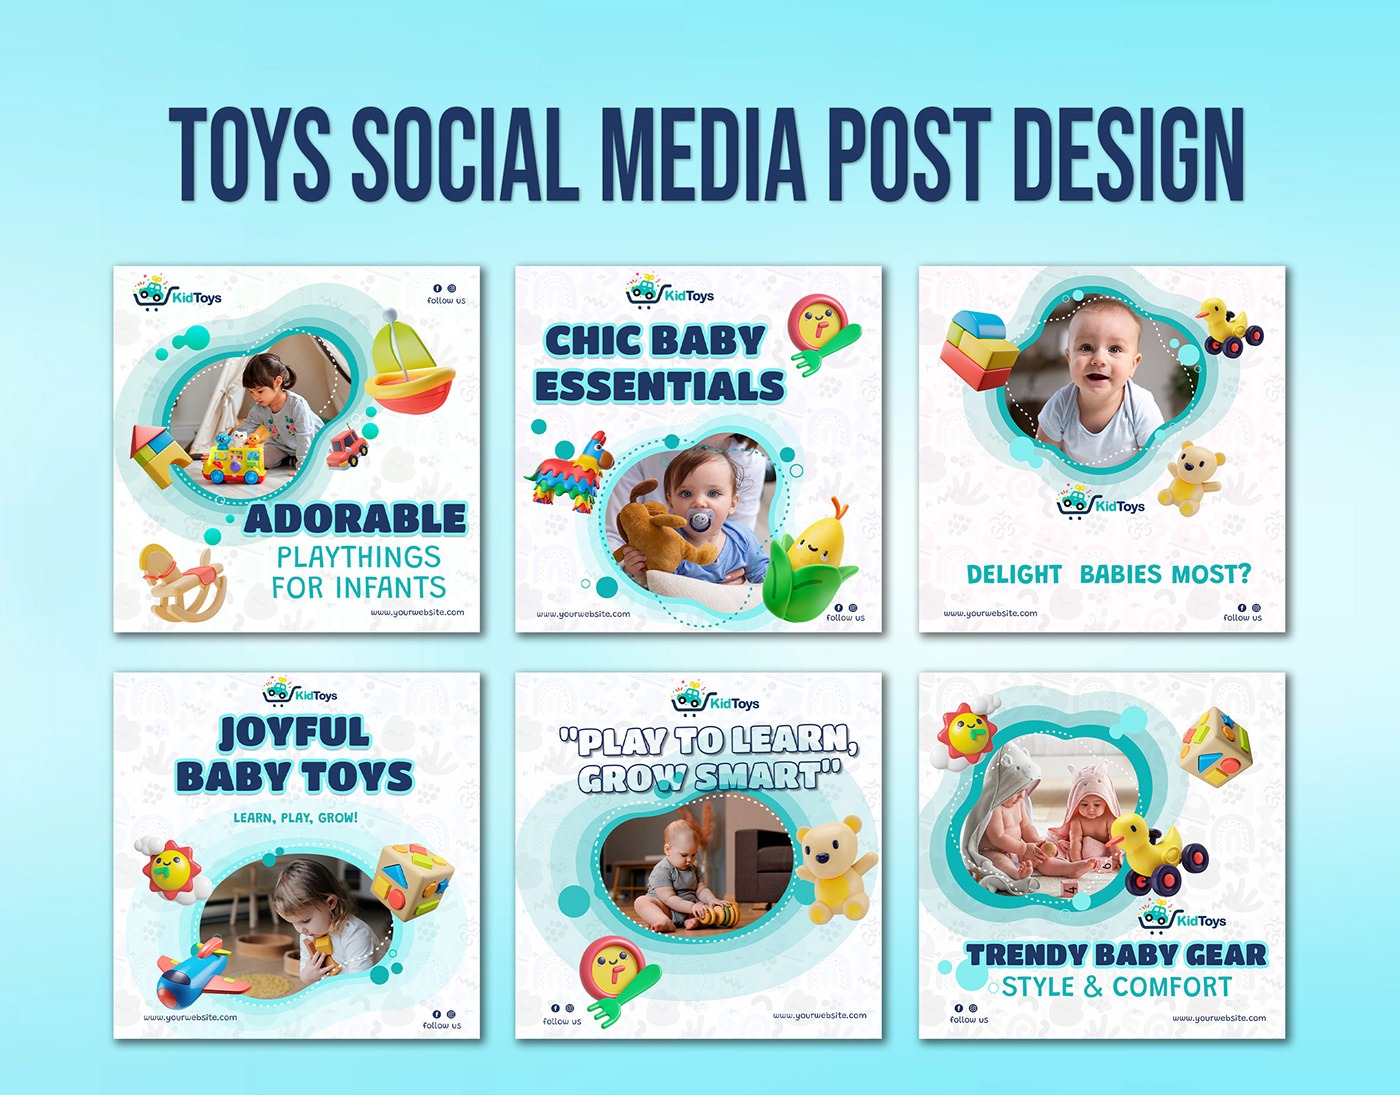 Social media post Instagram Post graphic design  toys Social toy creative baby toy post design baby toys design toy post design TOYS POST